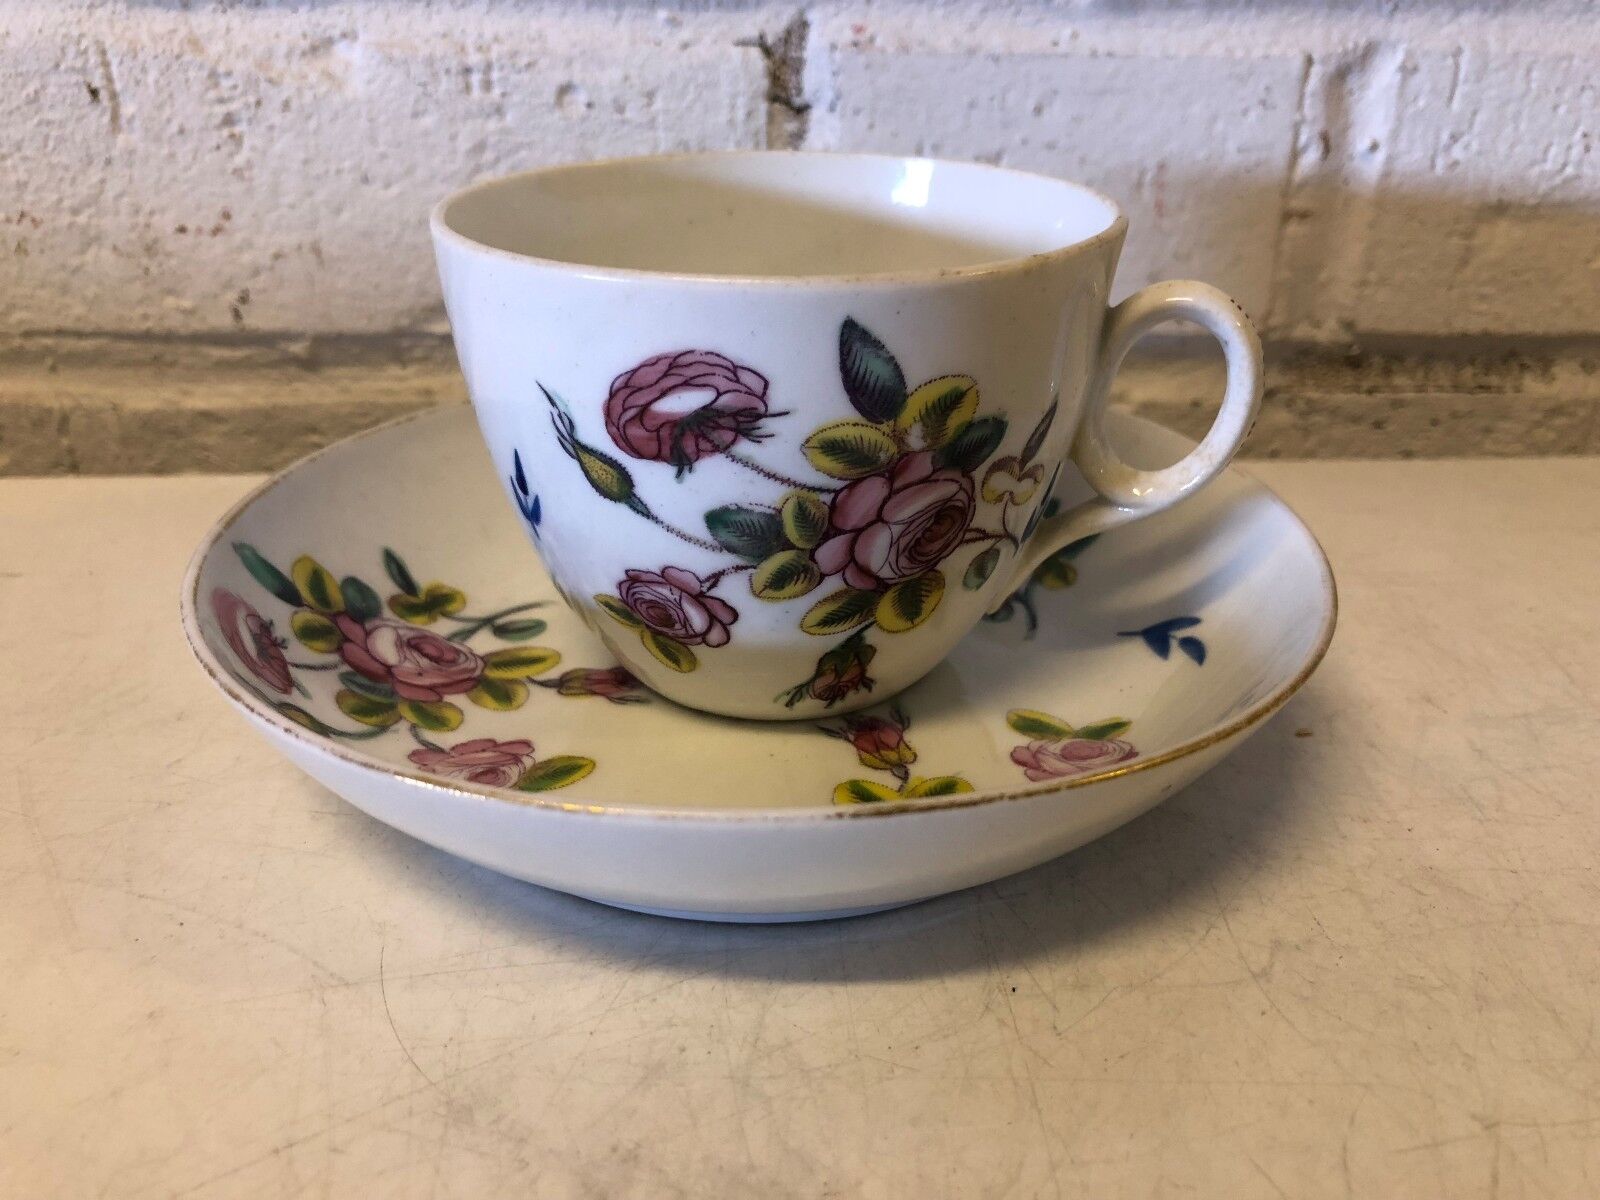 Antique 18th or 19th Century New Hall Porcelain Cup & Saucer Floral Decorations